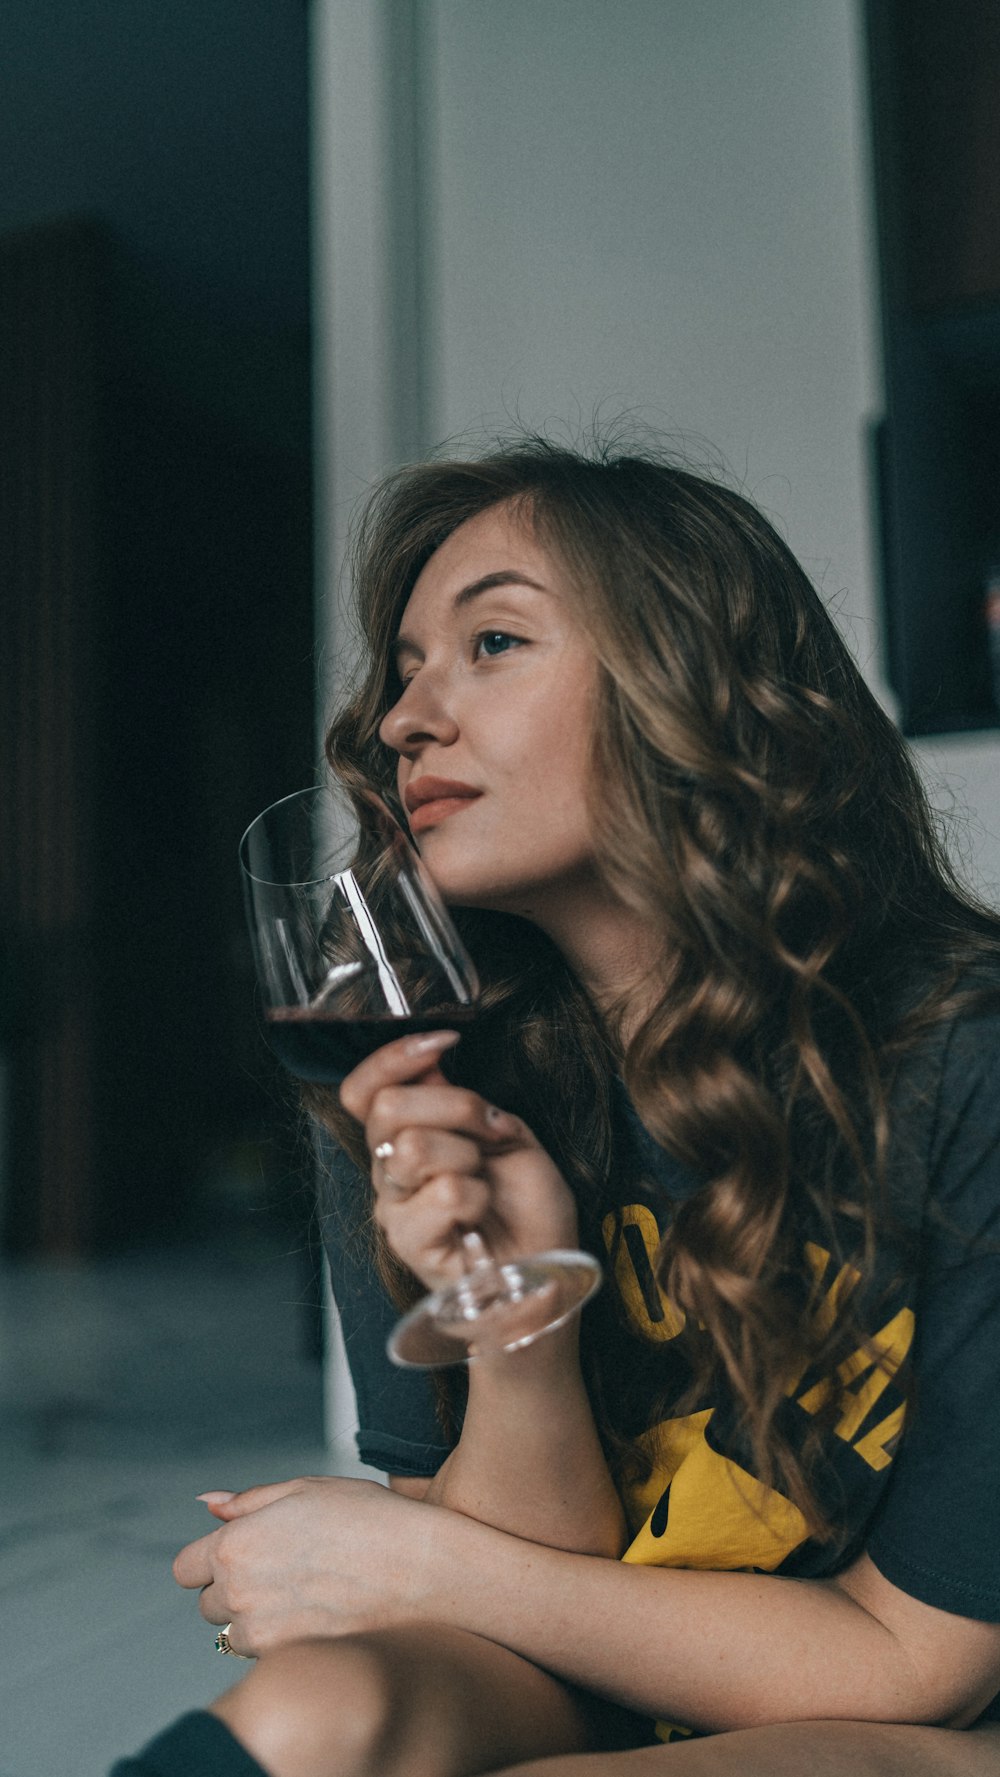 a woman sitting on the floor holding a glass of wine